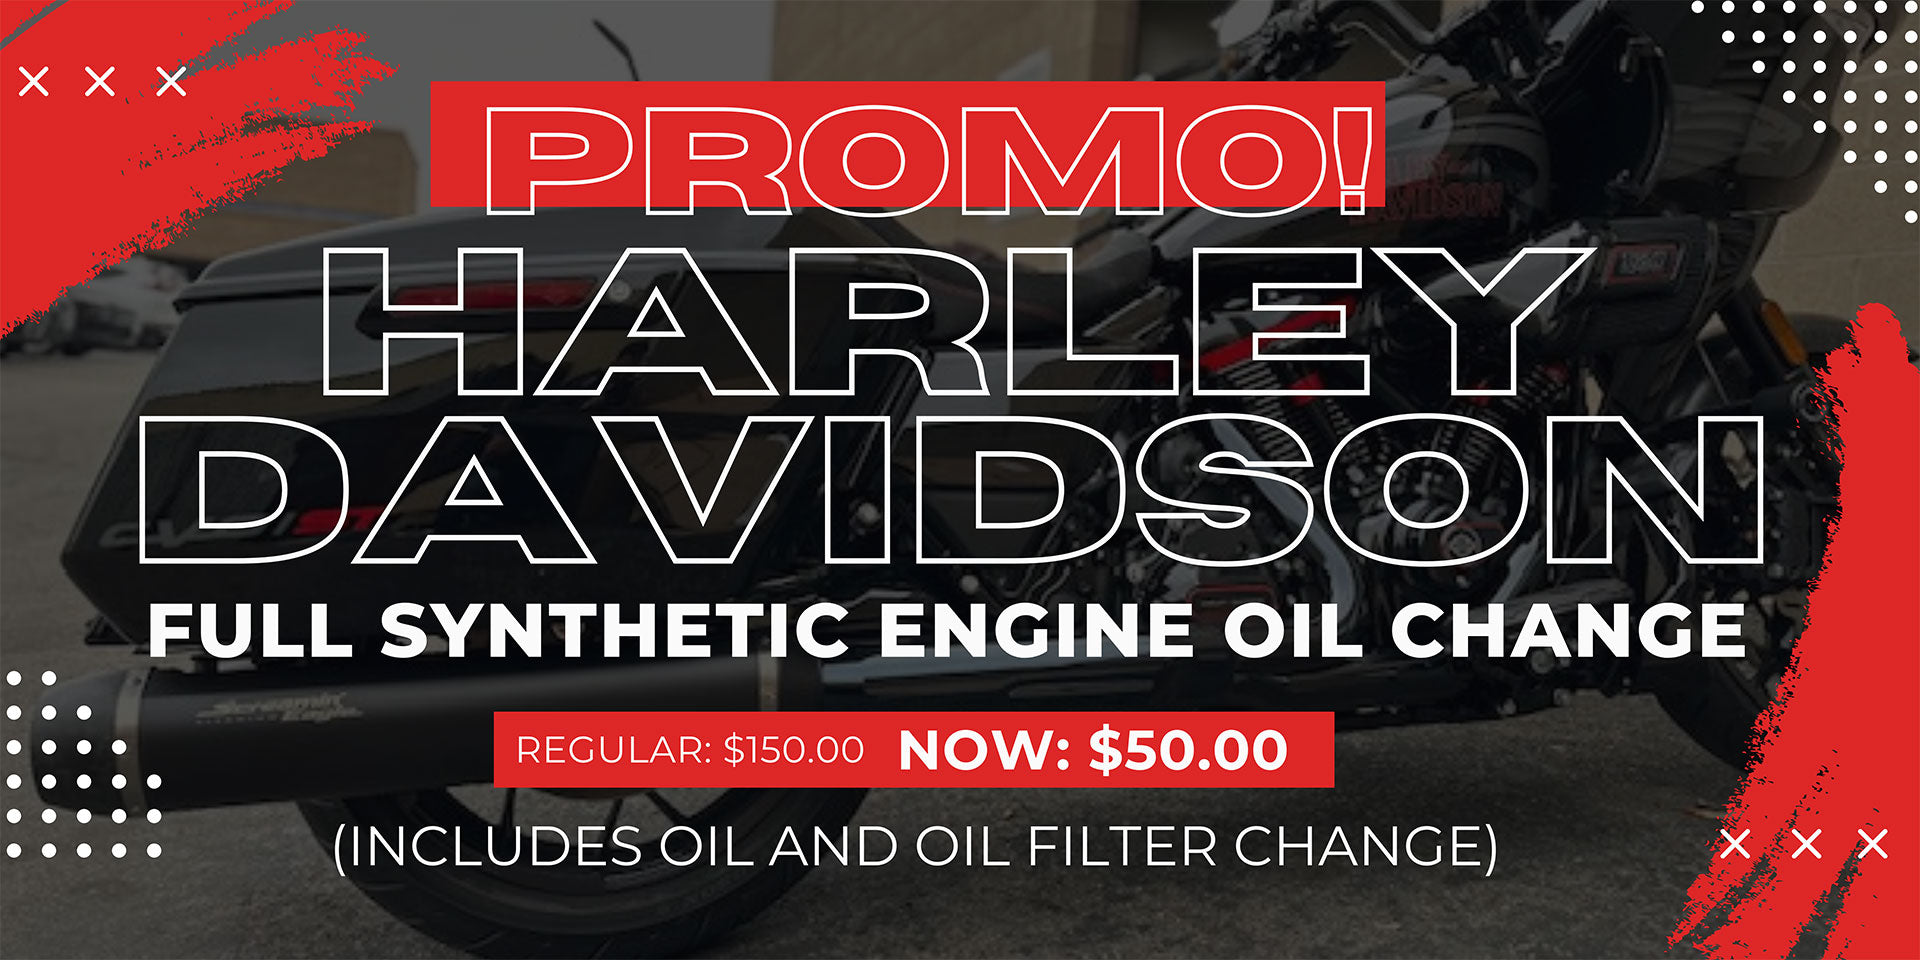 Harley Davidson Full Synthetic Engine Oil Change Promo Call 714-879-8180 for more info